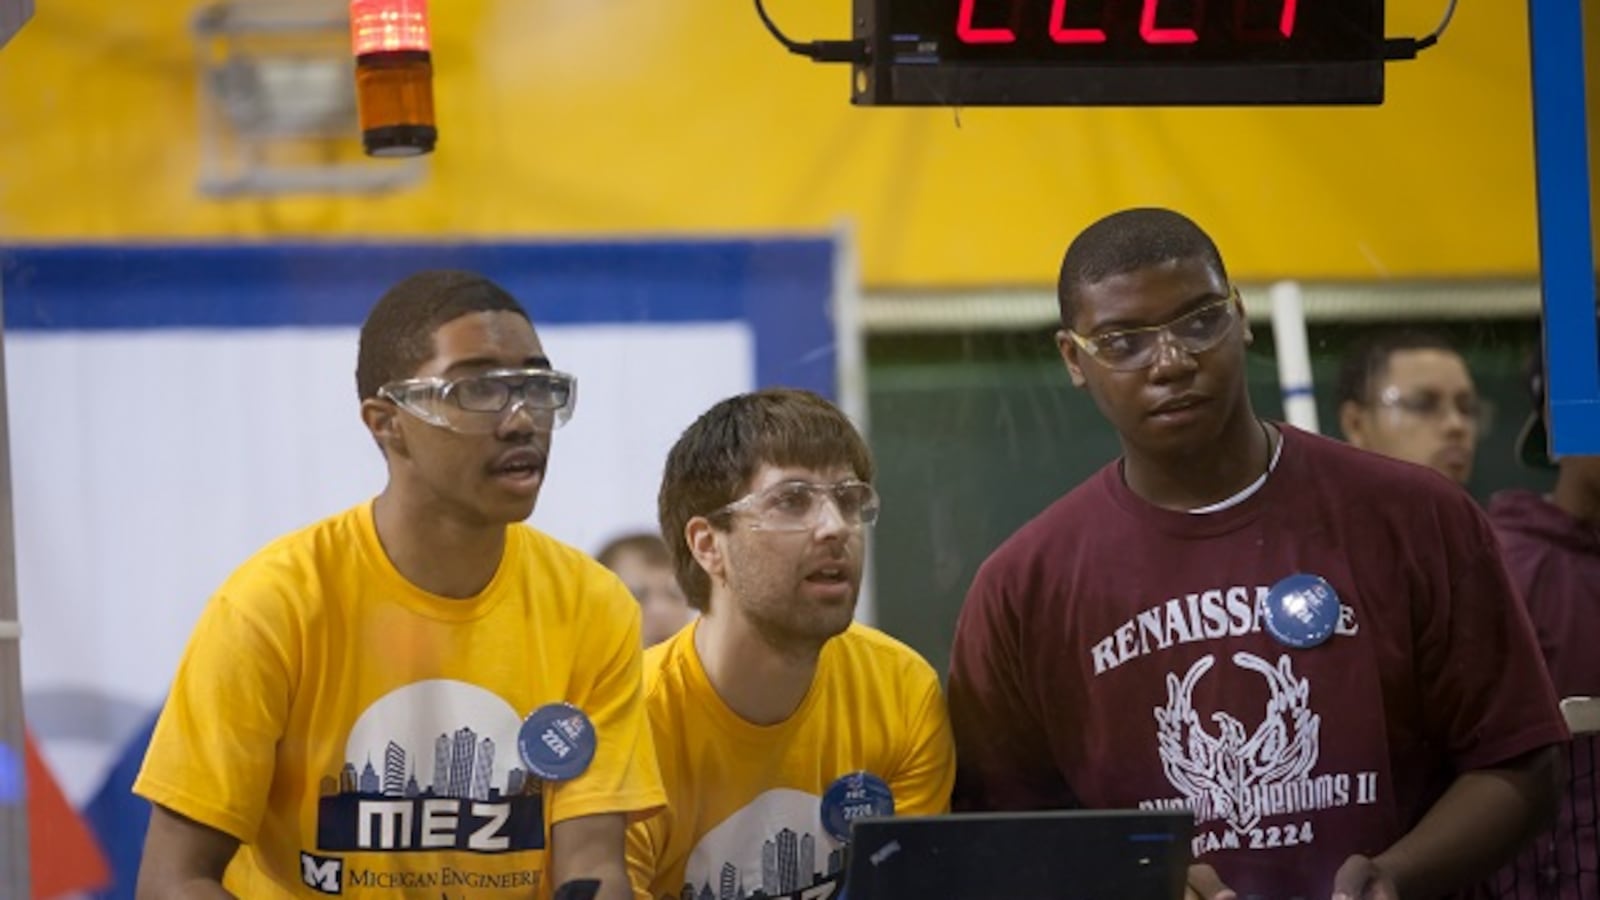 A student wearing a Renaissance High School t-shirt competes in a robotics competition.